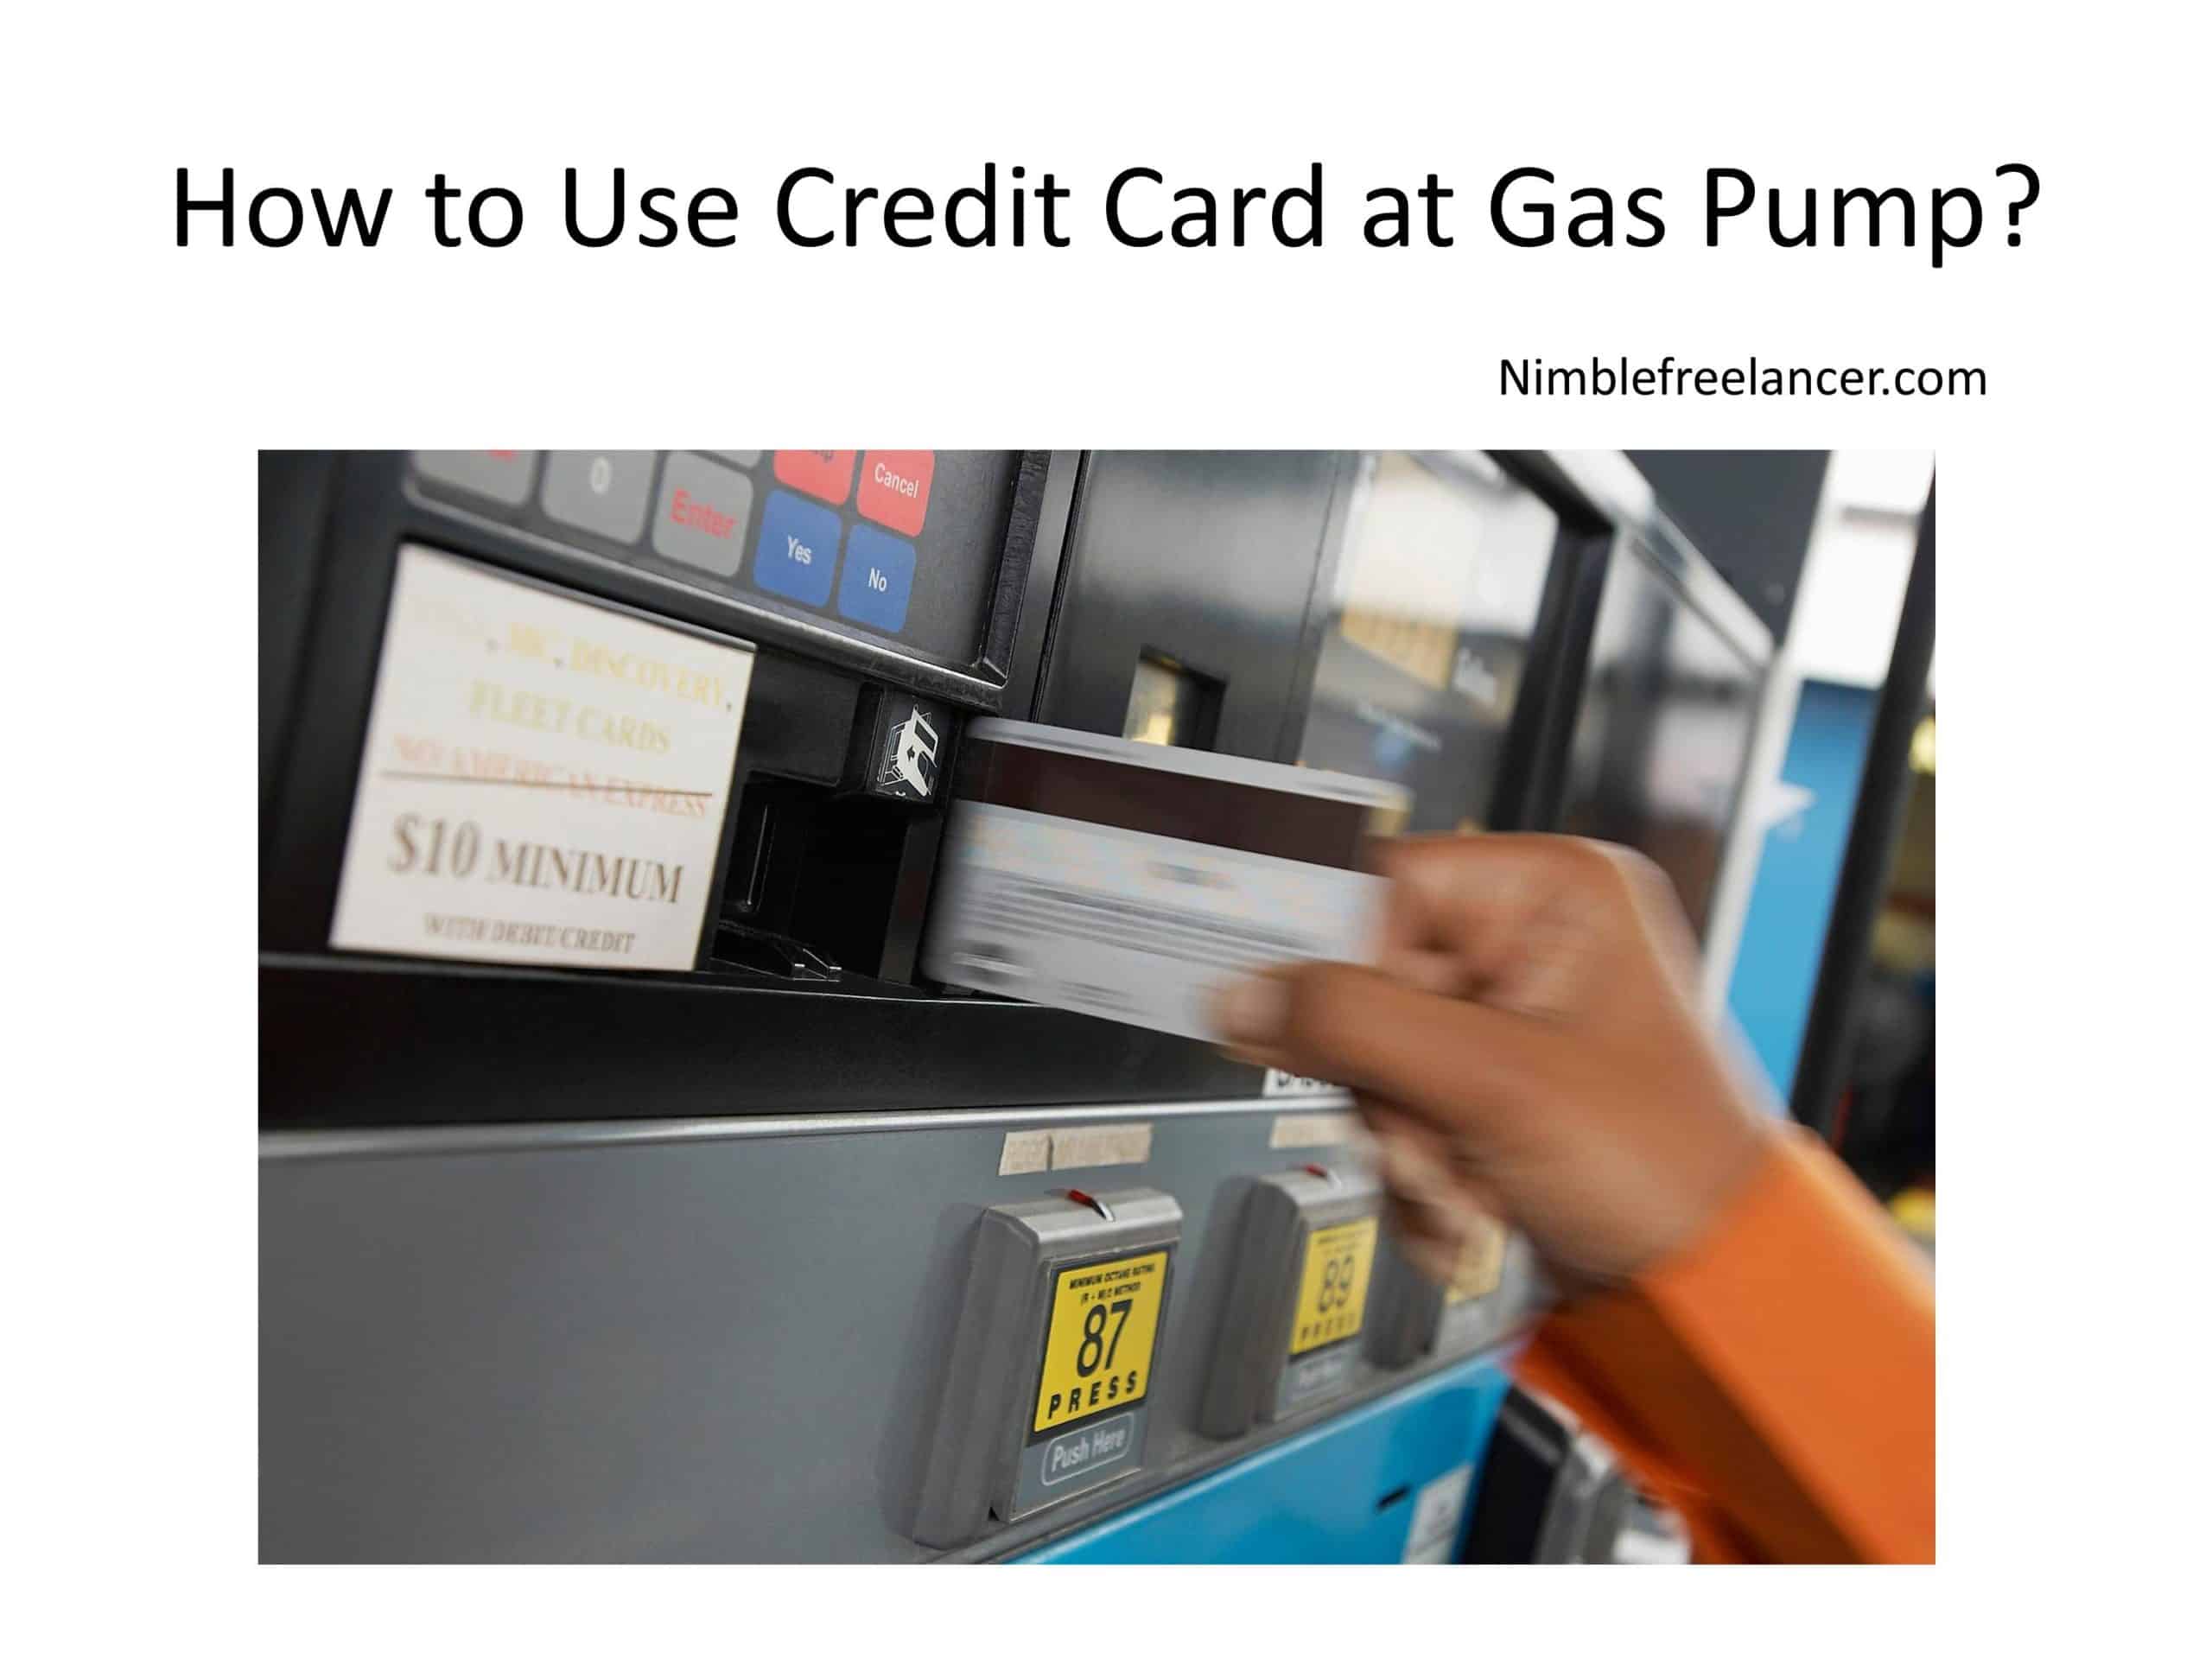 How to Use Credit Card at Gas Pump